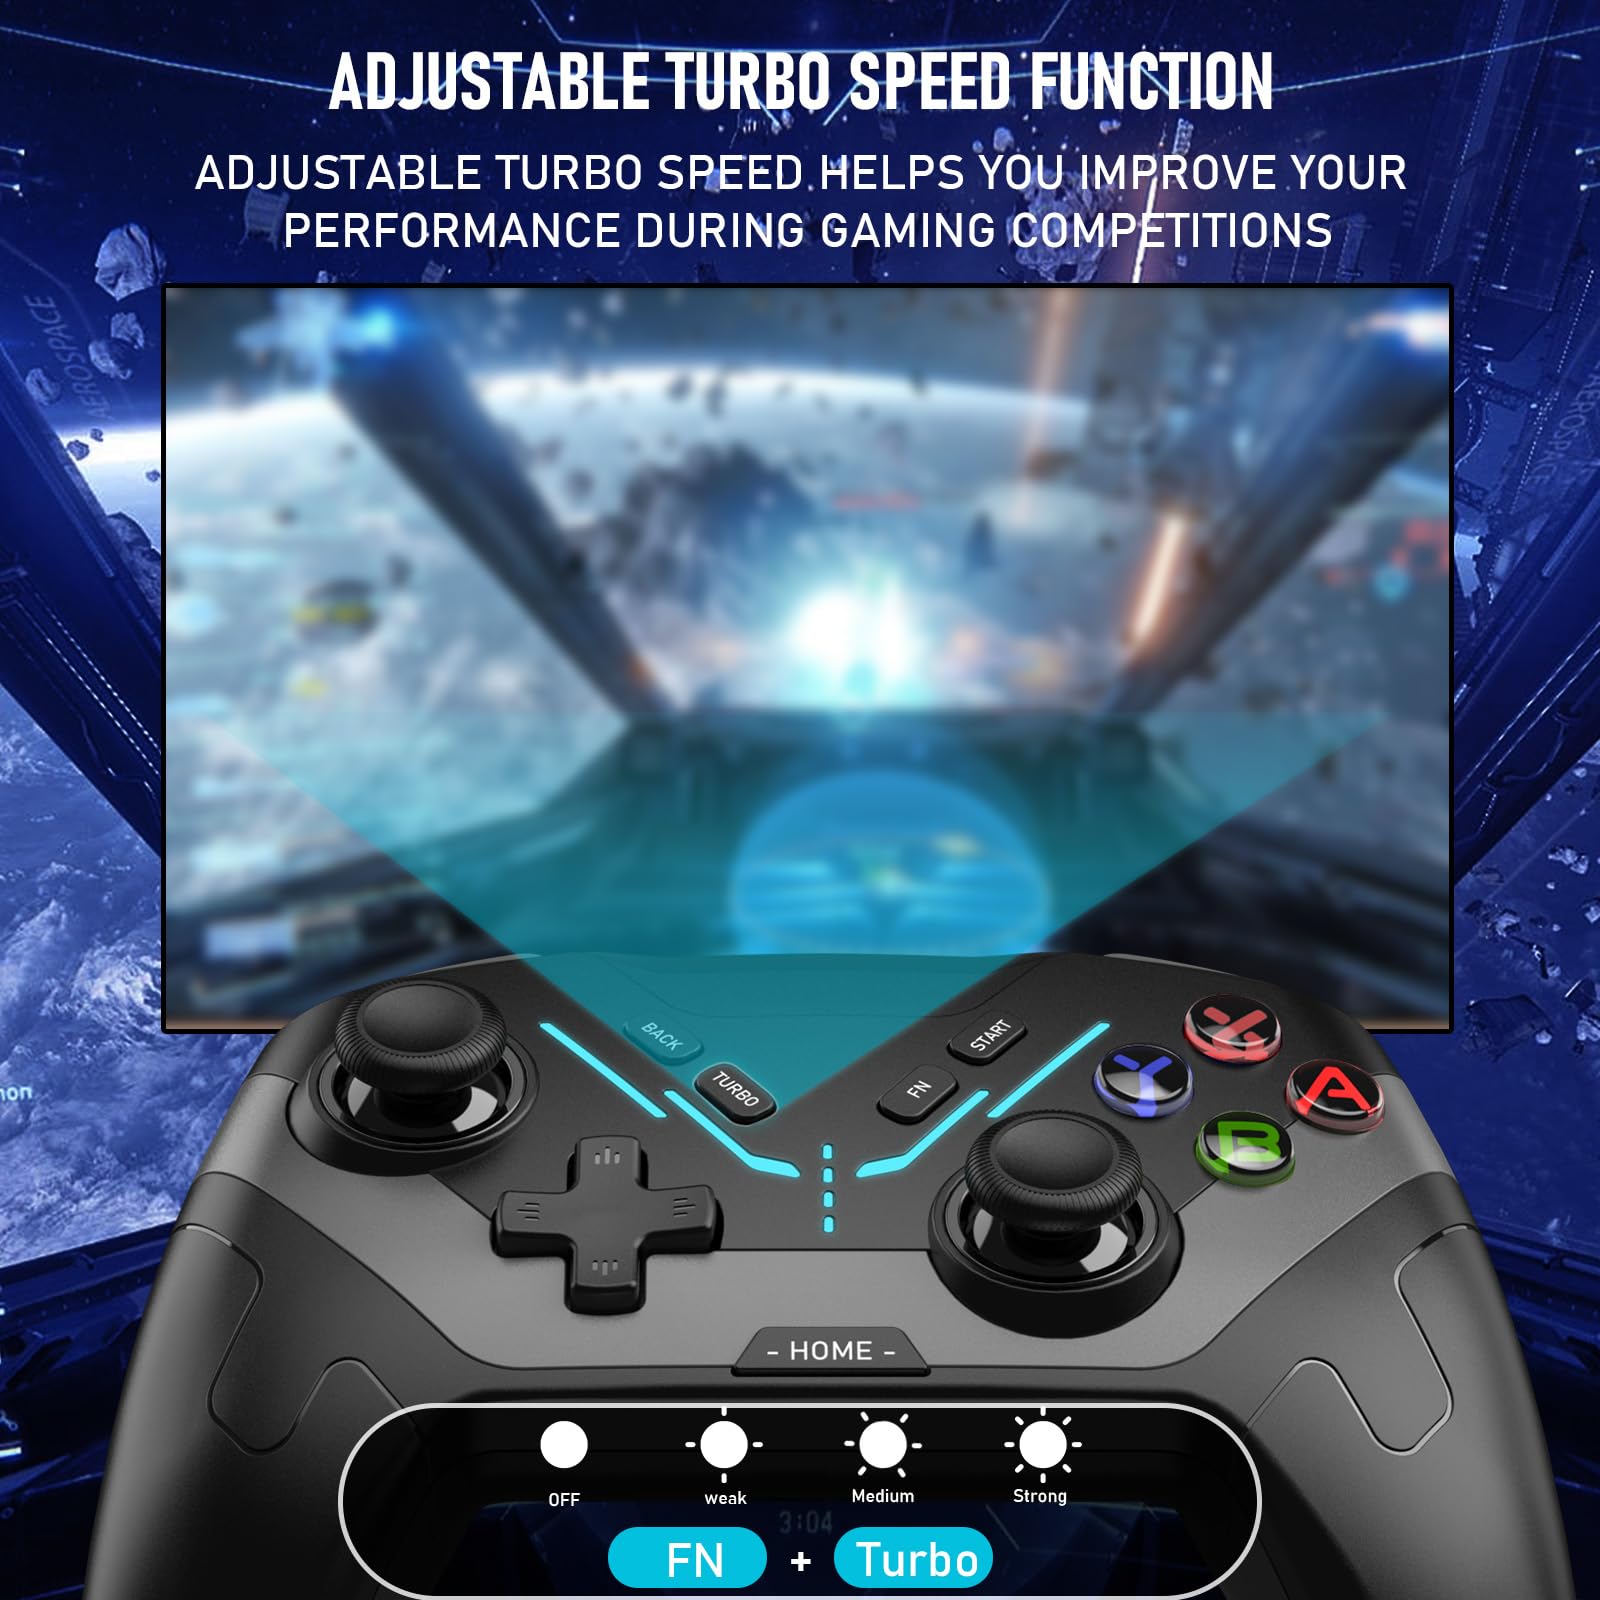 Wireless Controller for Switch/Lite/OLED, Diswoe Controller with a Mouse Touch Feeling on Back Buttons, Pro Controller with Wake-up,Programmable, Turbo Function